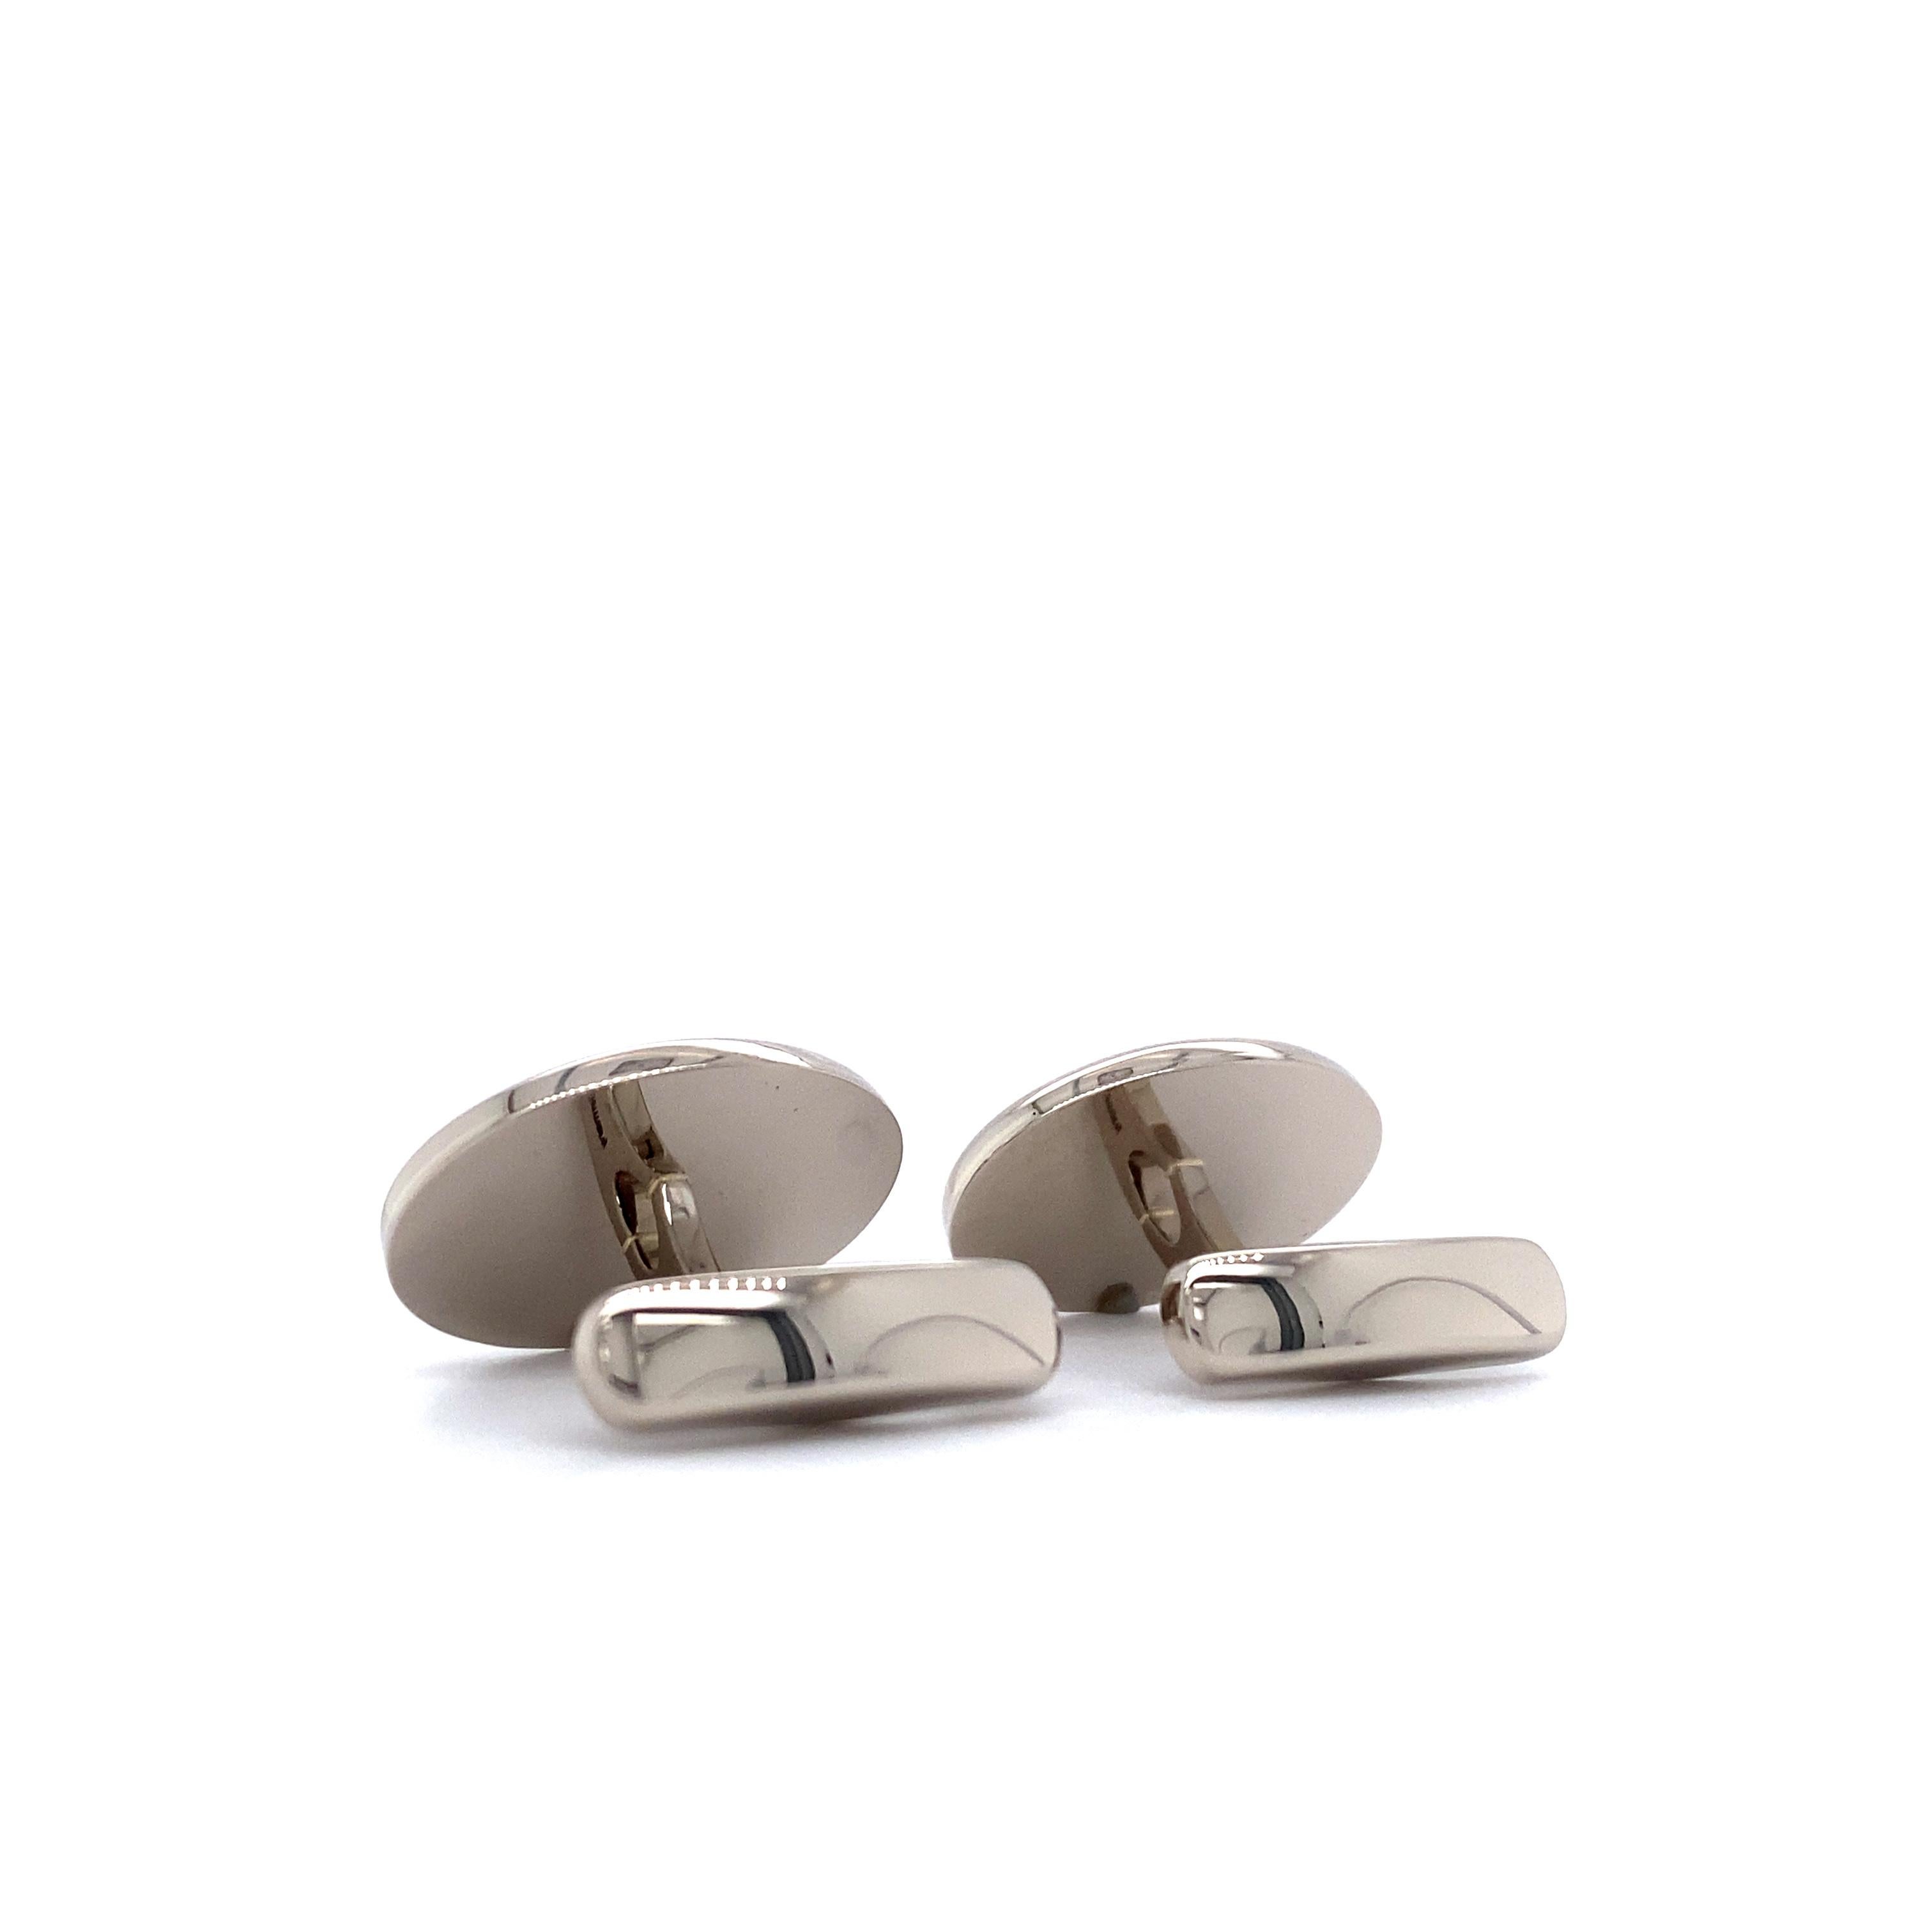 Contemporary Oval Cufflinks - 18k Palladium White Gold - Highly Polished - 15.7 mm x 20.8 mm For Sale